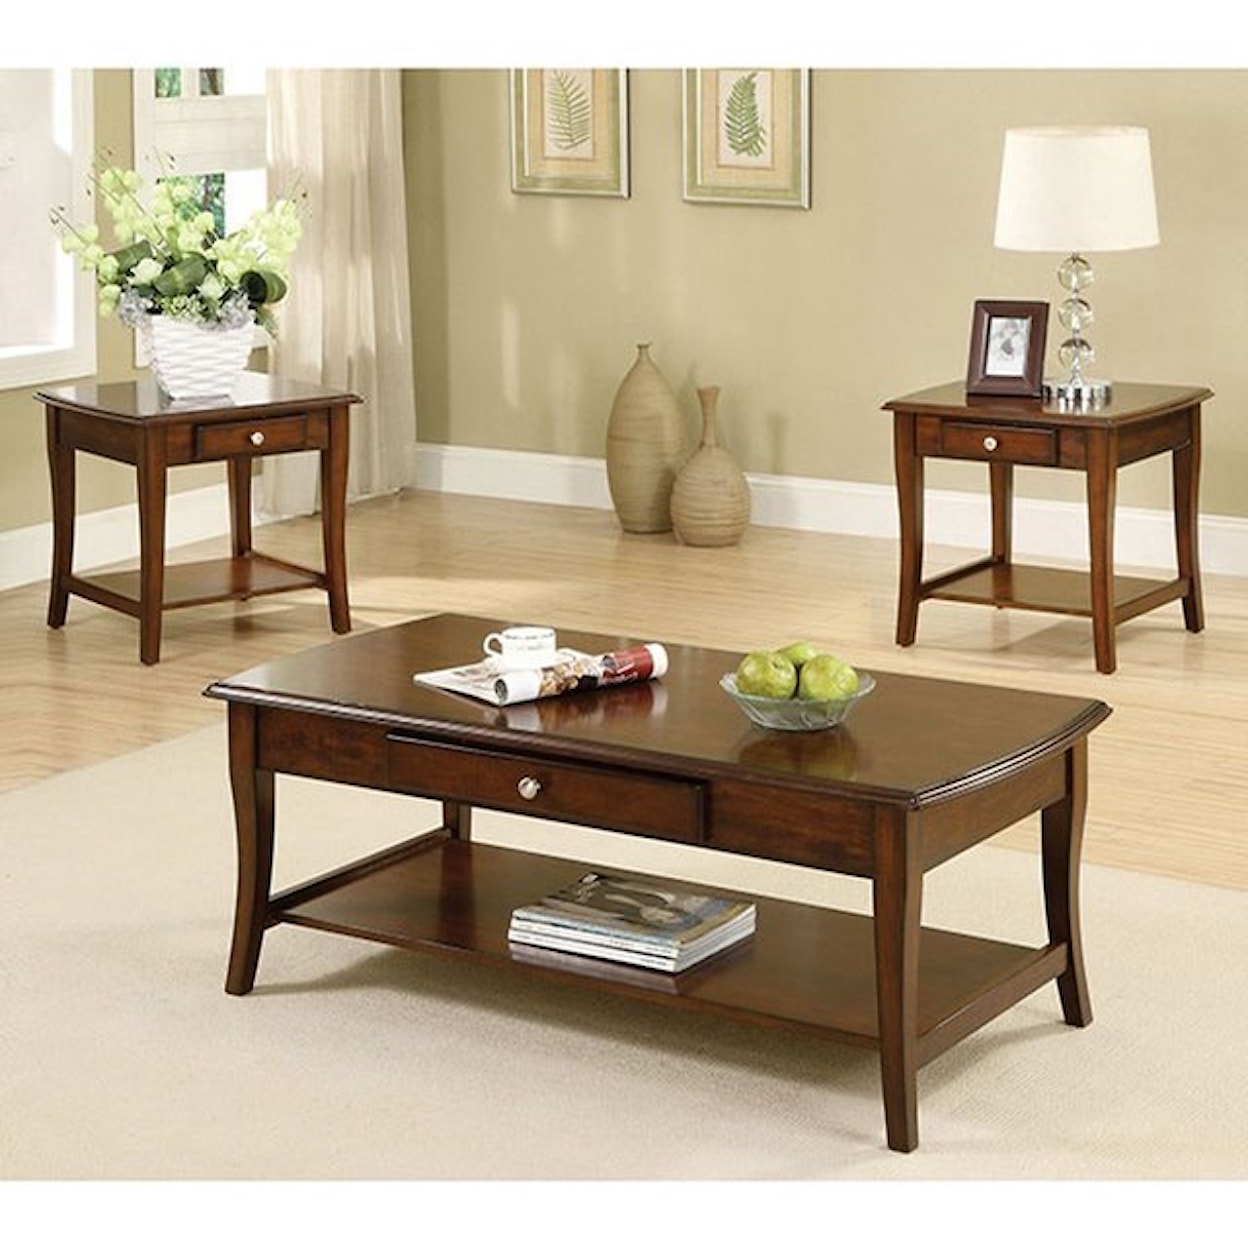 Furniture of America Lincoln Park 3 Piece Table Set